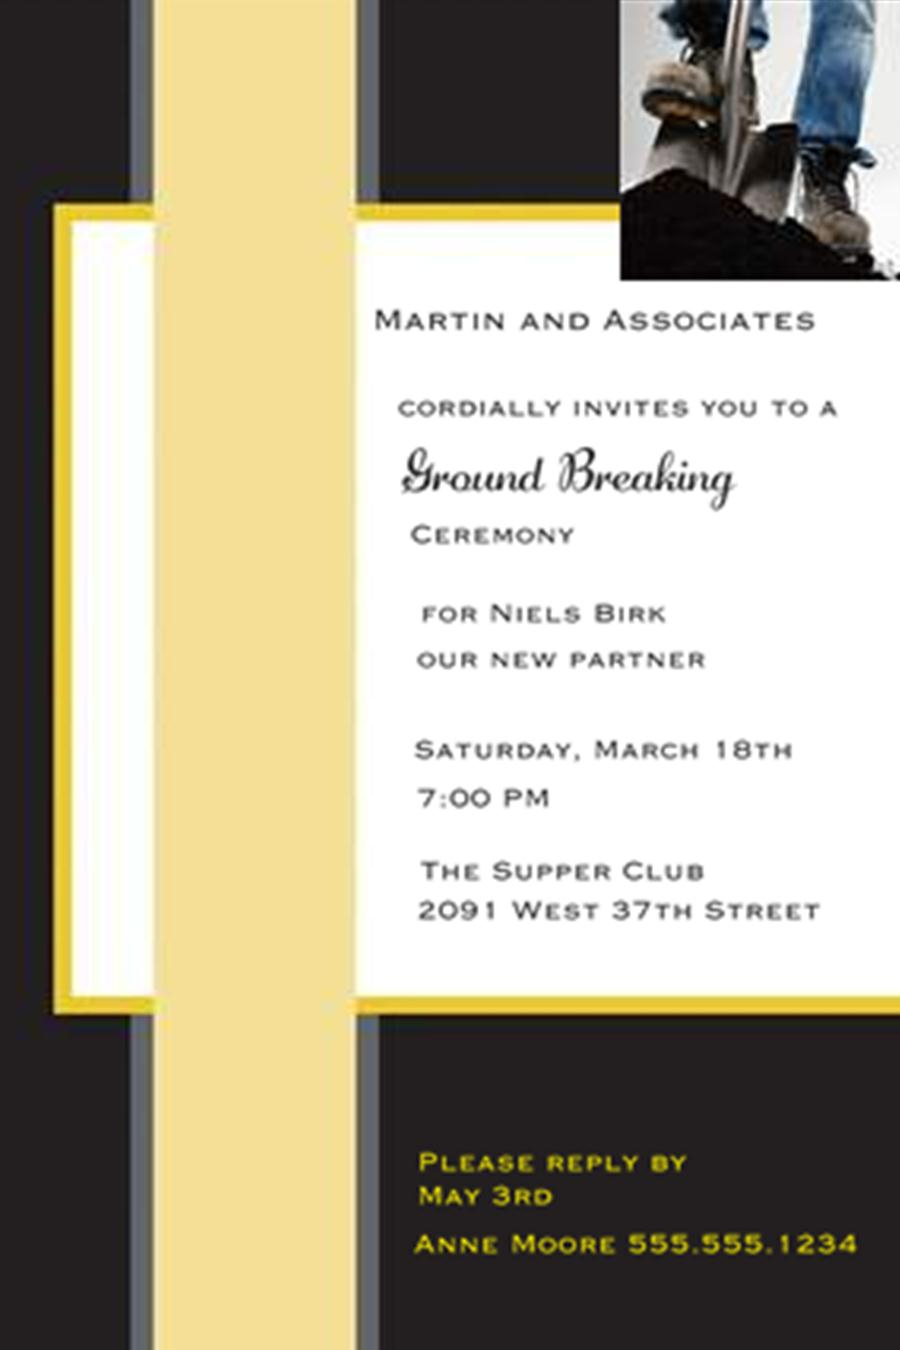 Grand Opening Invitations And Ground Breaking Invitations New within proportions 900 X 1350